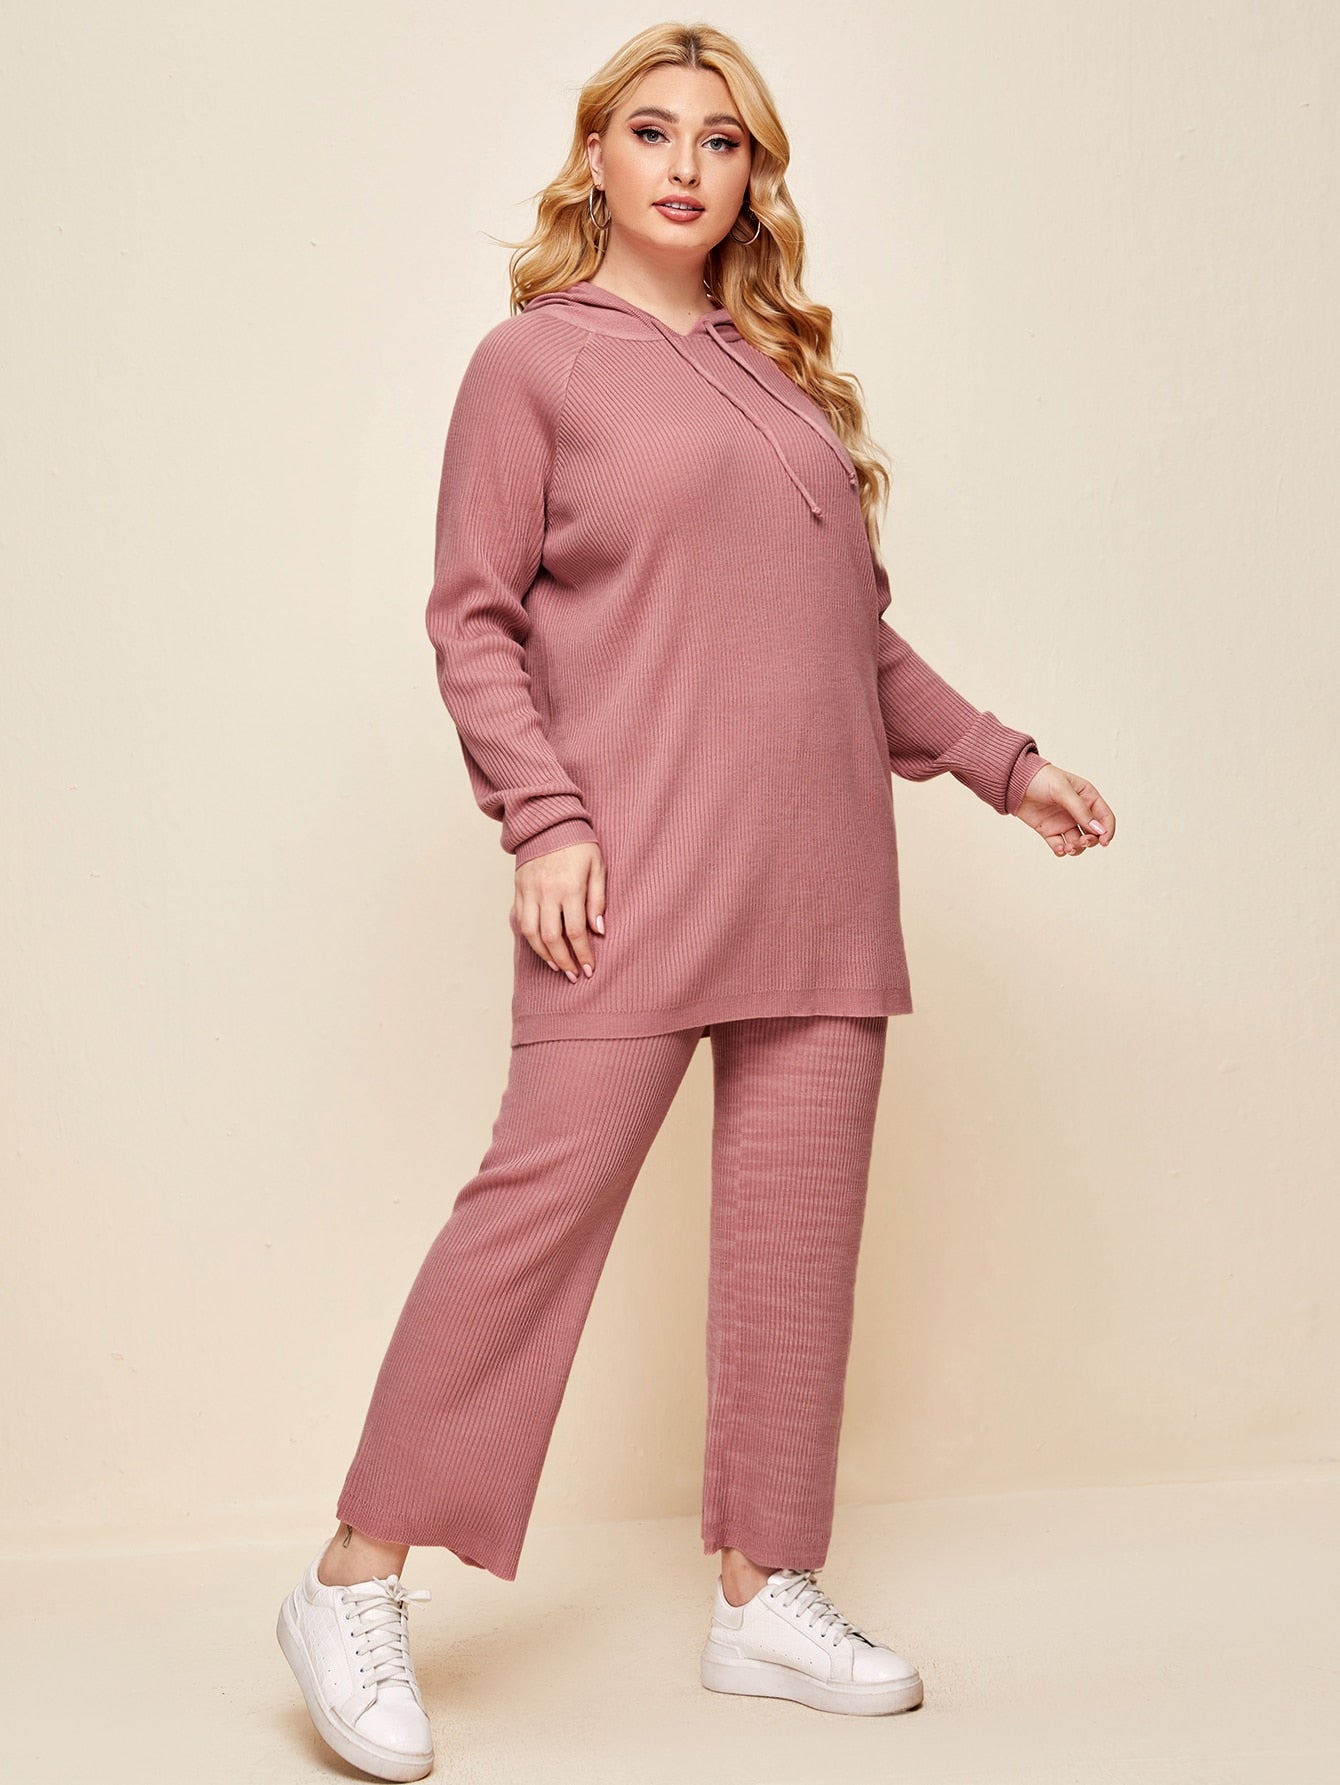 Hooded sweater and pants set